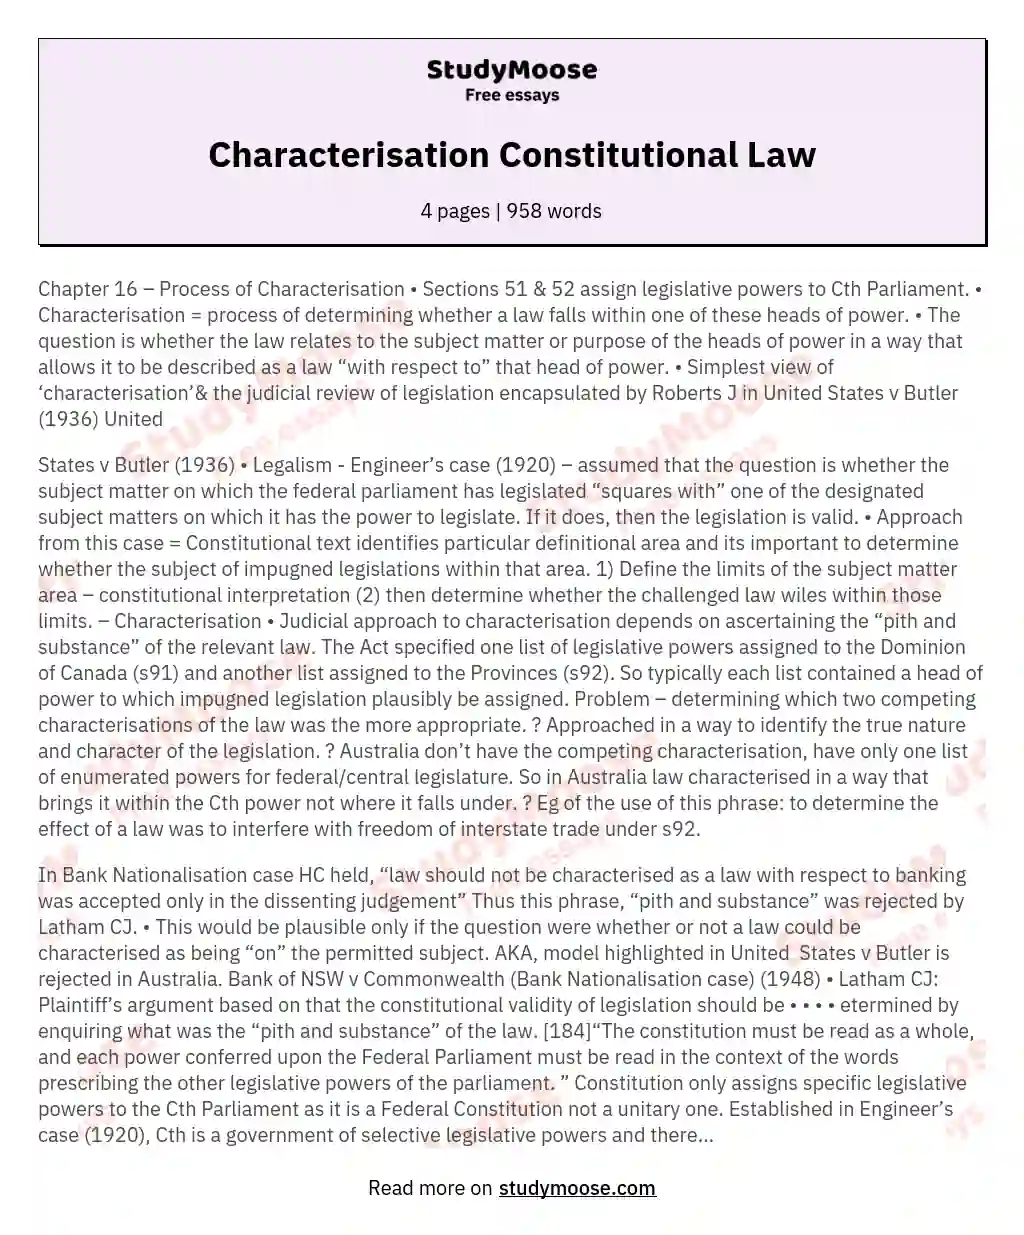 Characterisation Constitutional Law essay